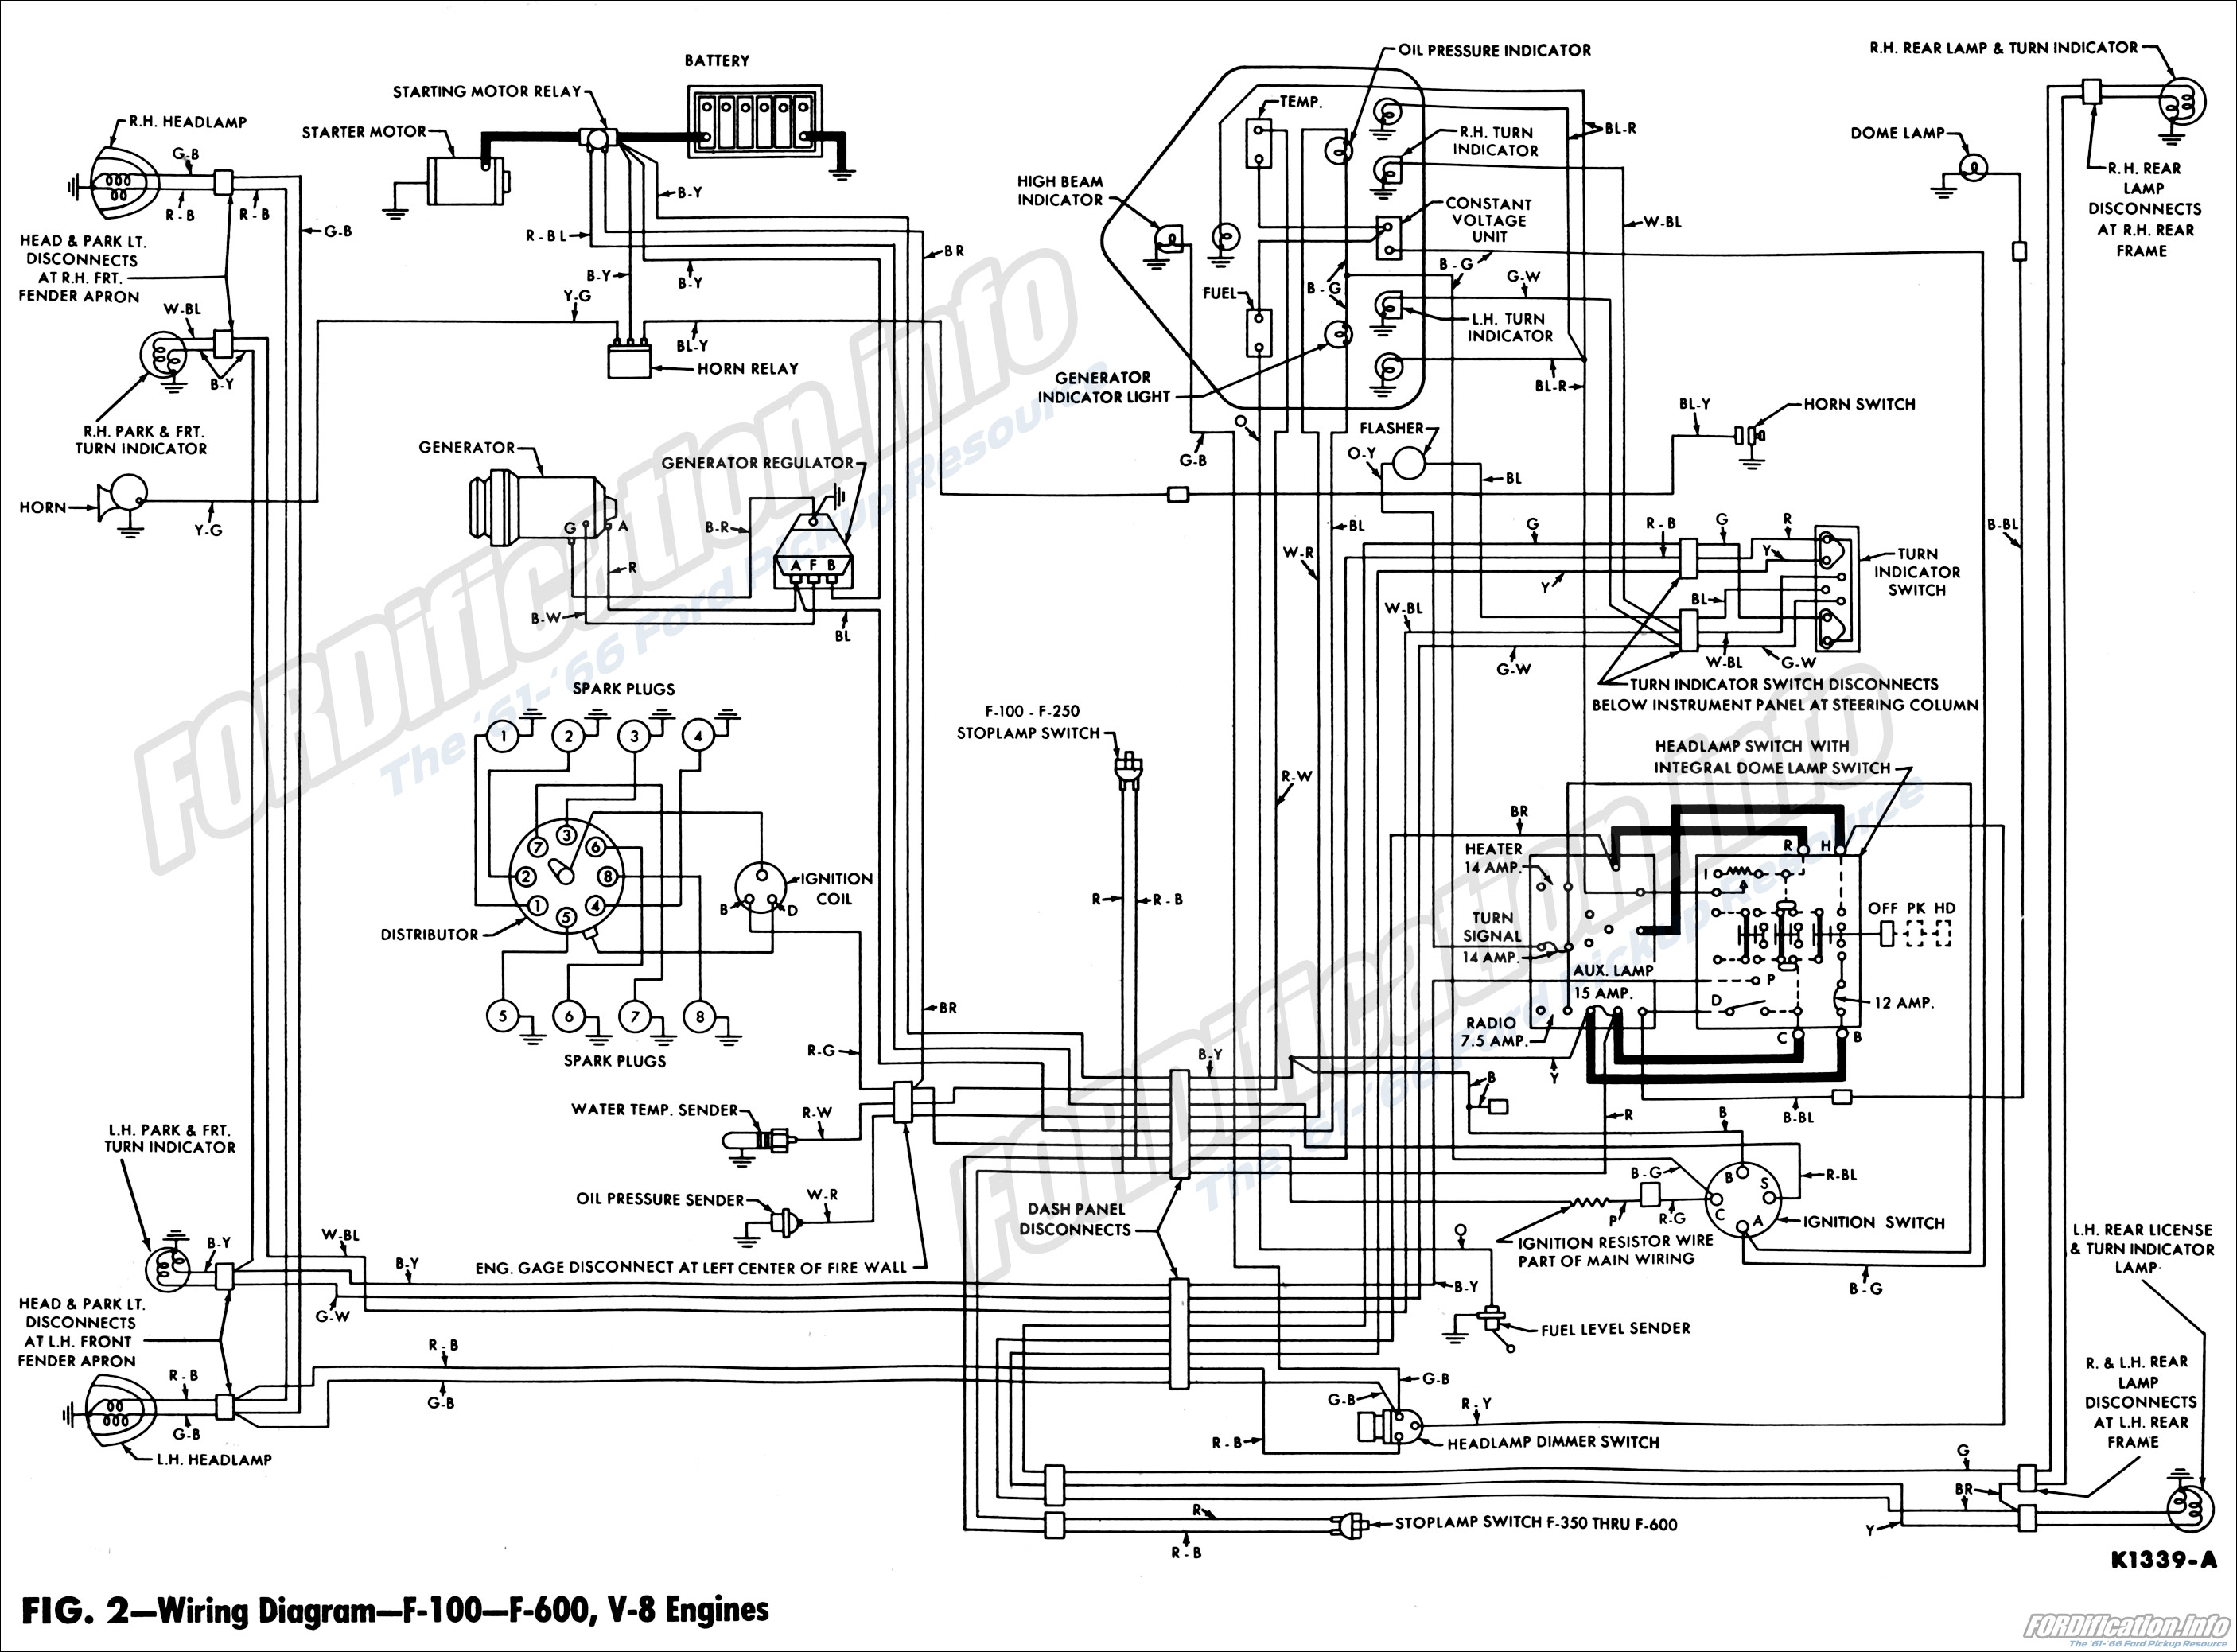 1962 Ford Truck Wiring Diagrams - Fordification Info